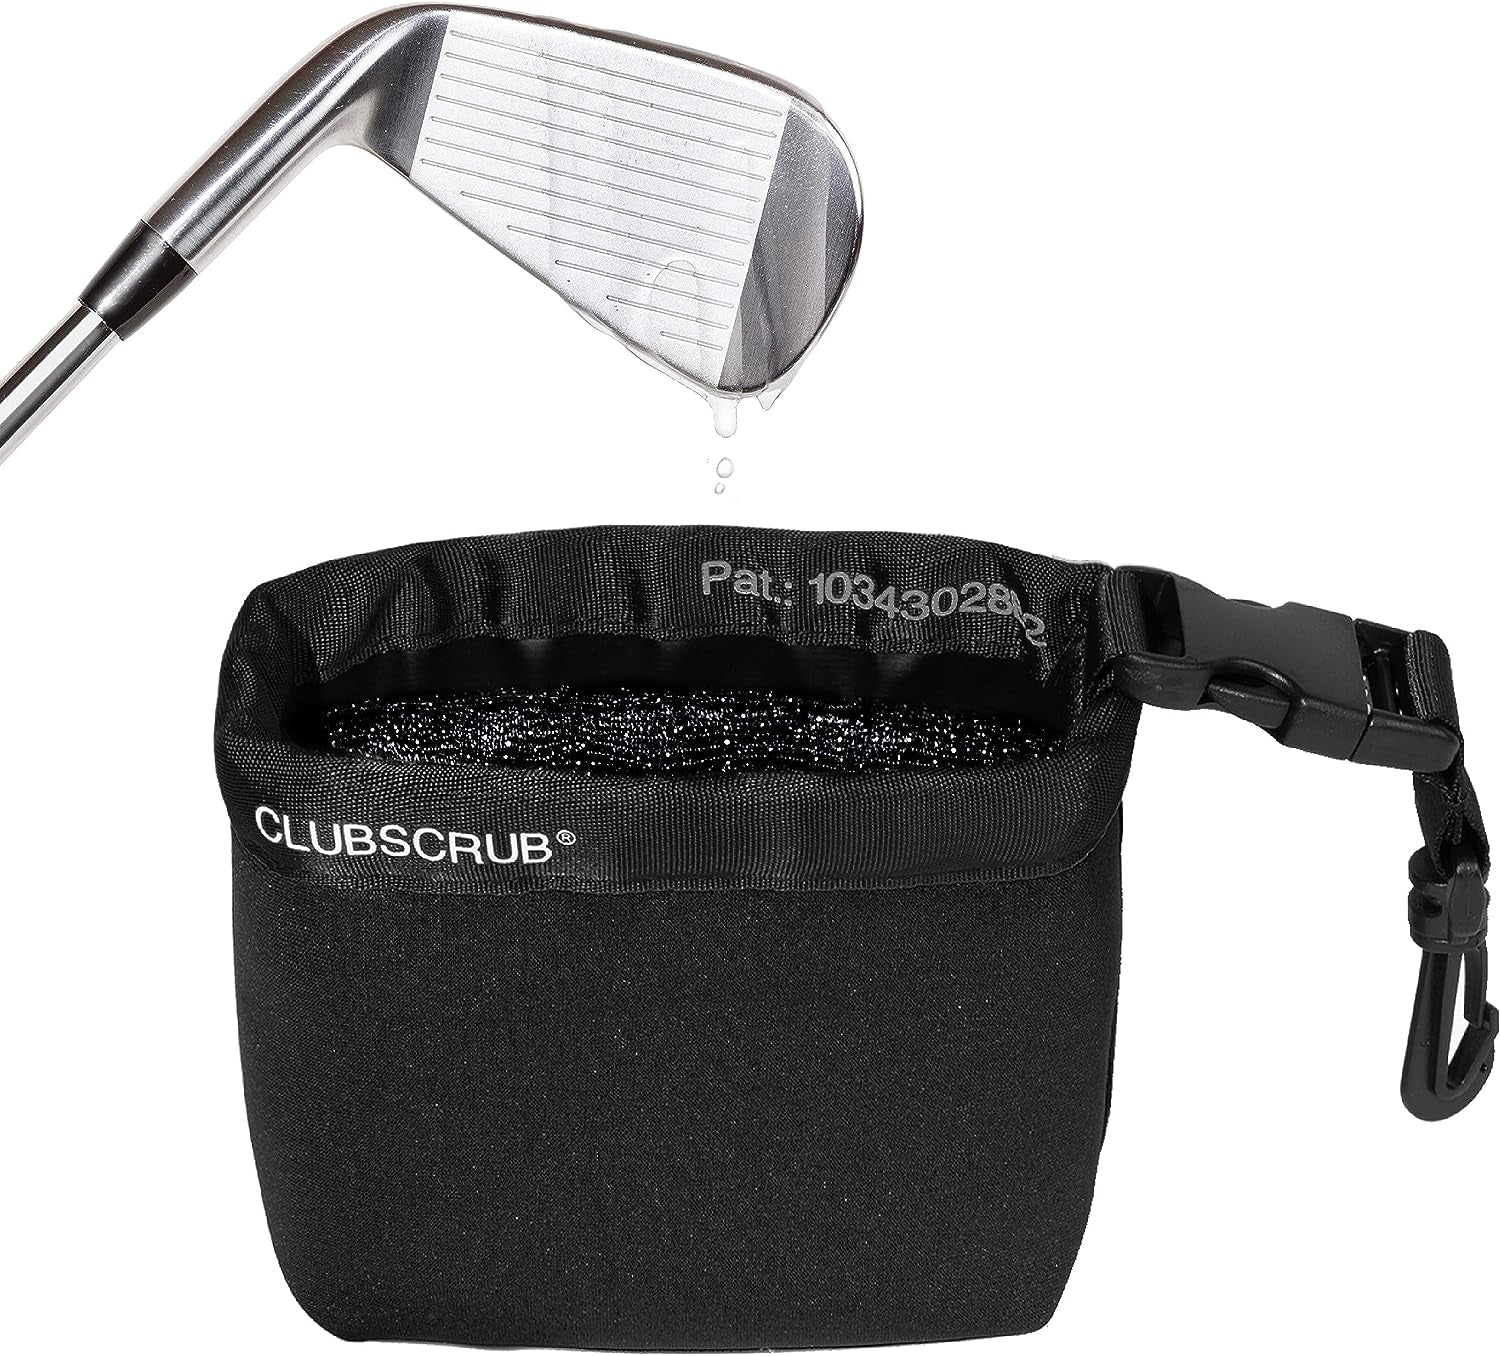 Club Scrub Golf Club and Golf Ball Cleaning Bag, Waterproof Clean Face Technology Liner, Detachable Clip, Machine Washable, Cleans Club Grooves, Dry Exterior Neoprene 